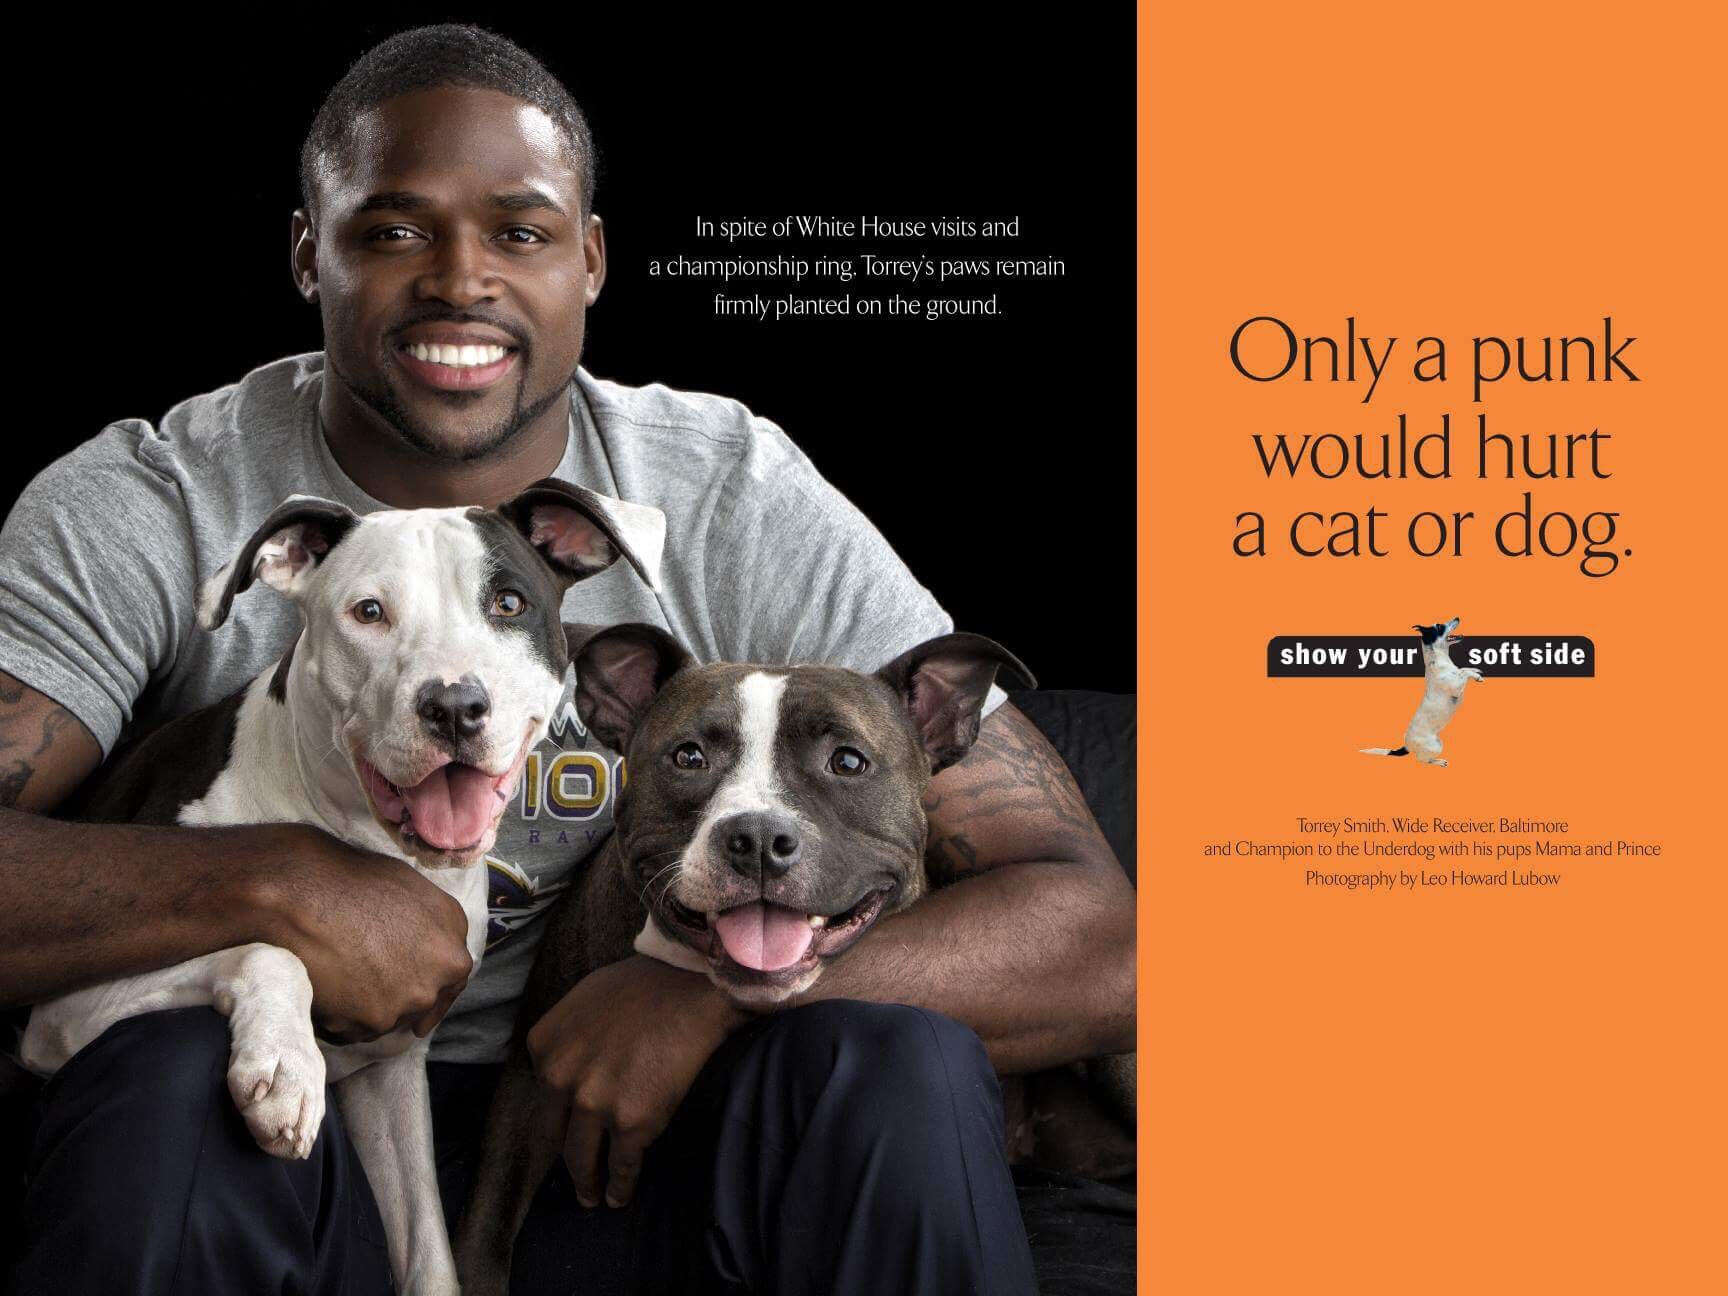 Torrey smith in an animal welfare campaign for show your soft side (SYSS)